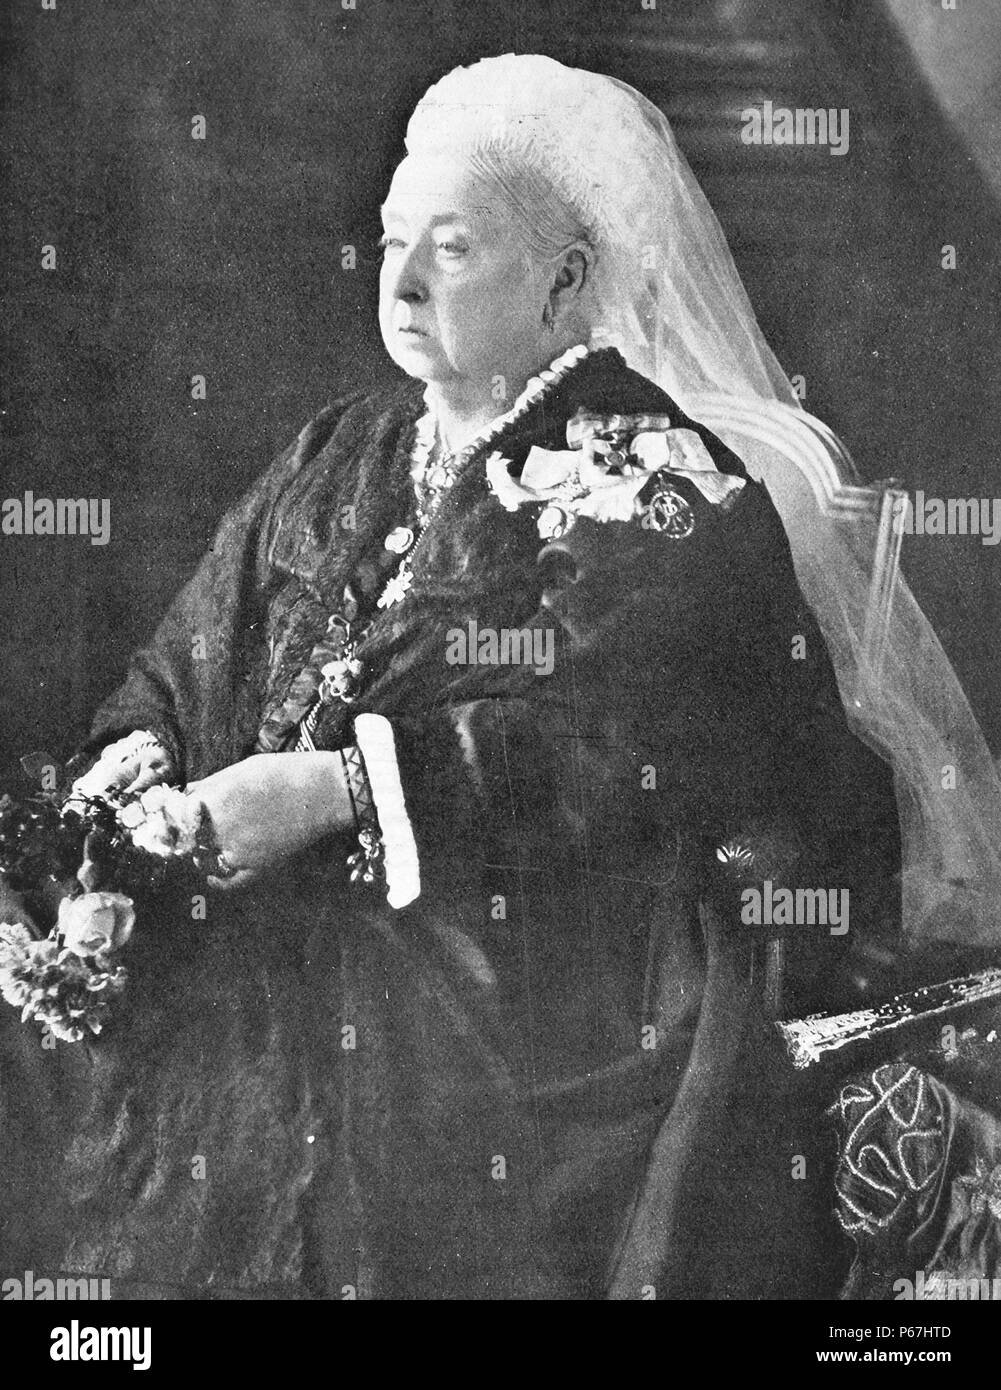 Queen Victoria of Great Britain 1899. Victoria (Alexandrina Victoria; 24 May 1819 – 22 January 1901) was the monarch of the United Kingdom of Great Britain and Ireland from 20 June 1837 until her death. From 1 May 1876, she used the additional title of Empress of India Stock Photo